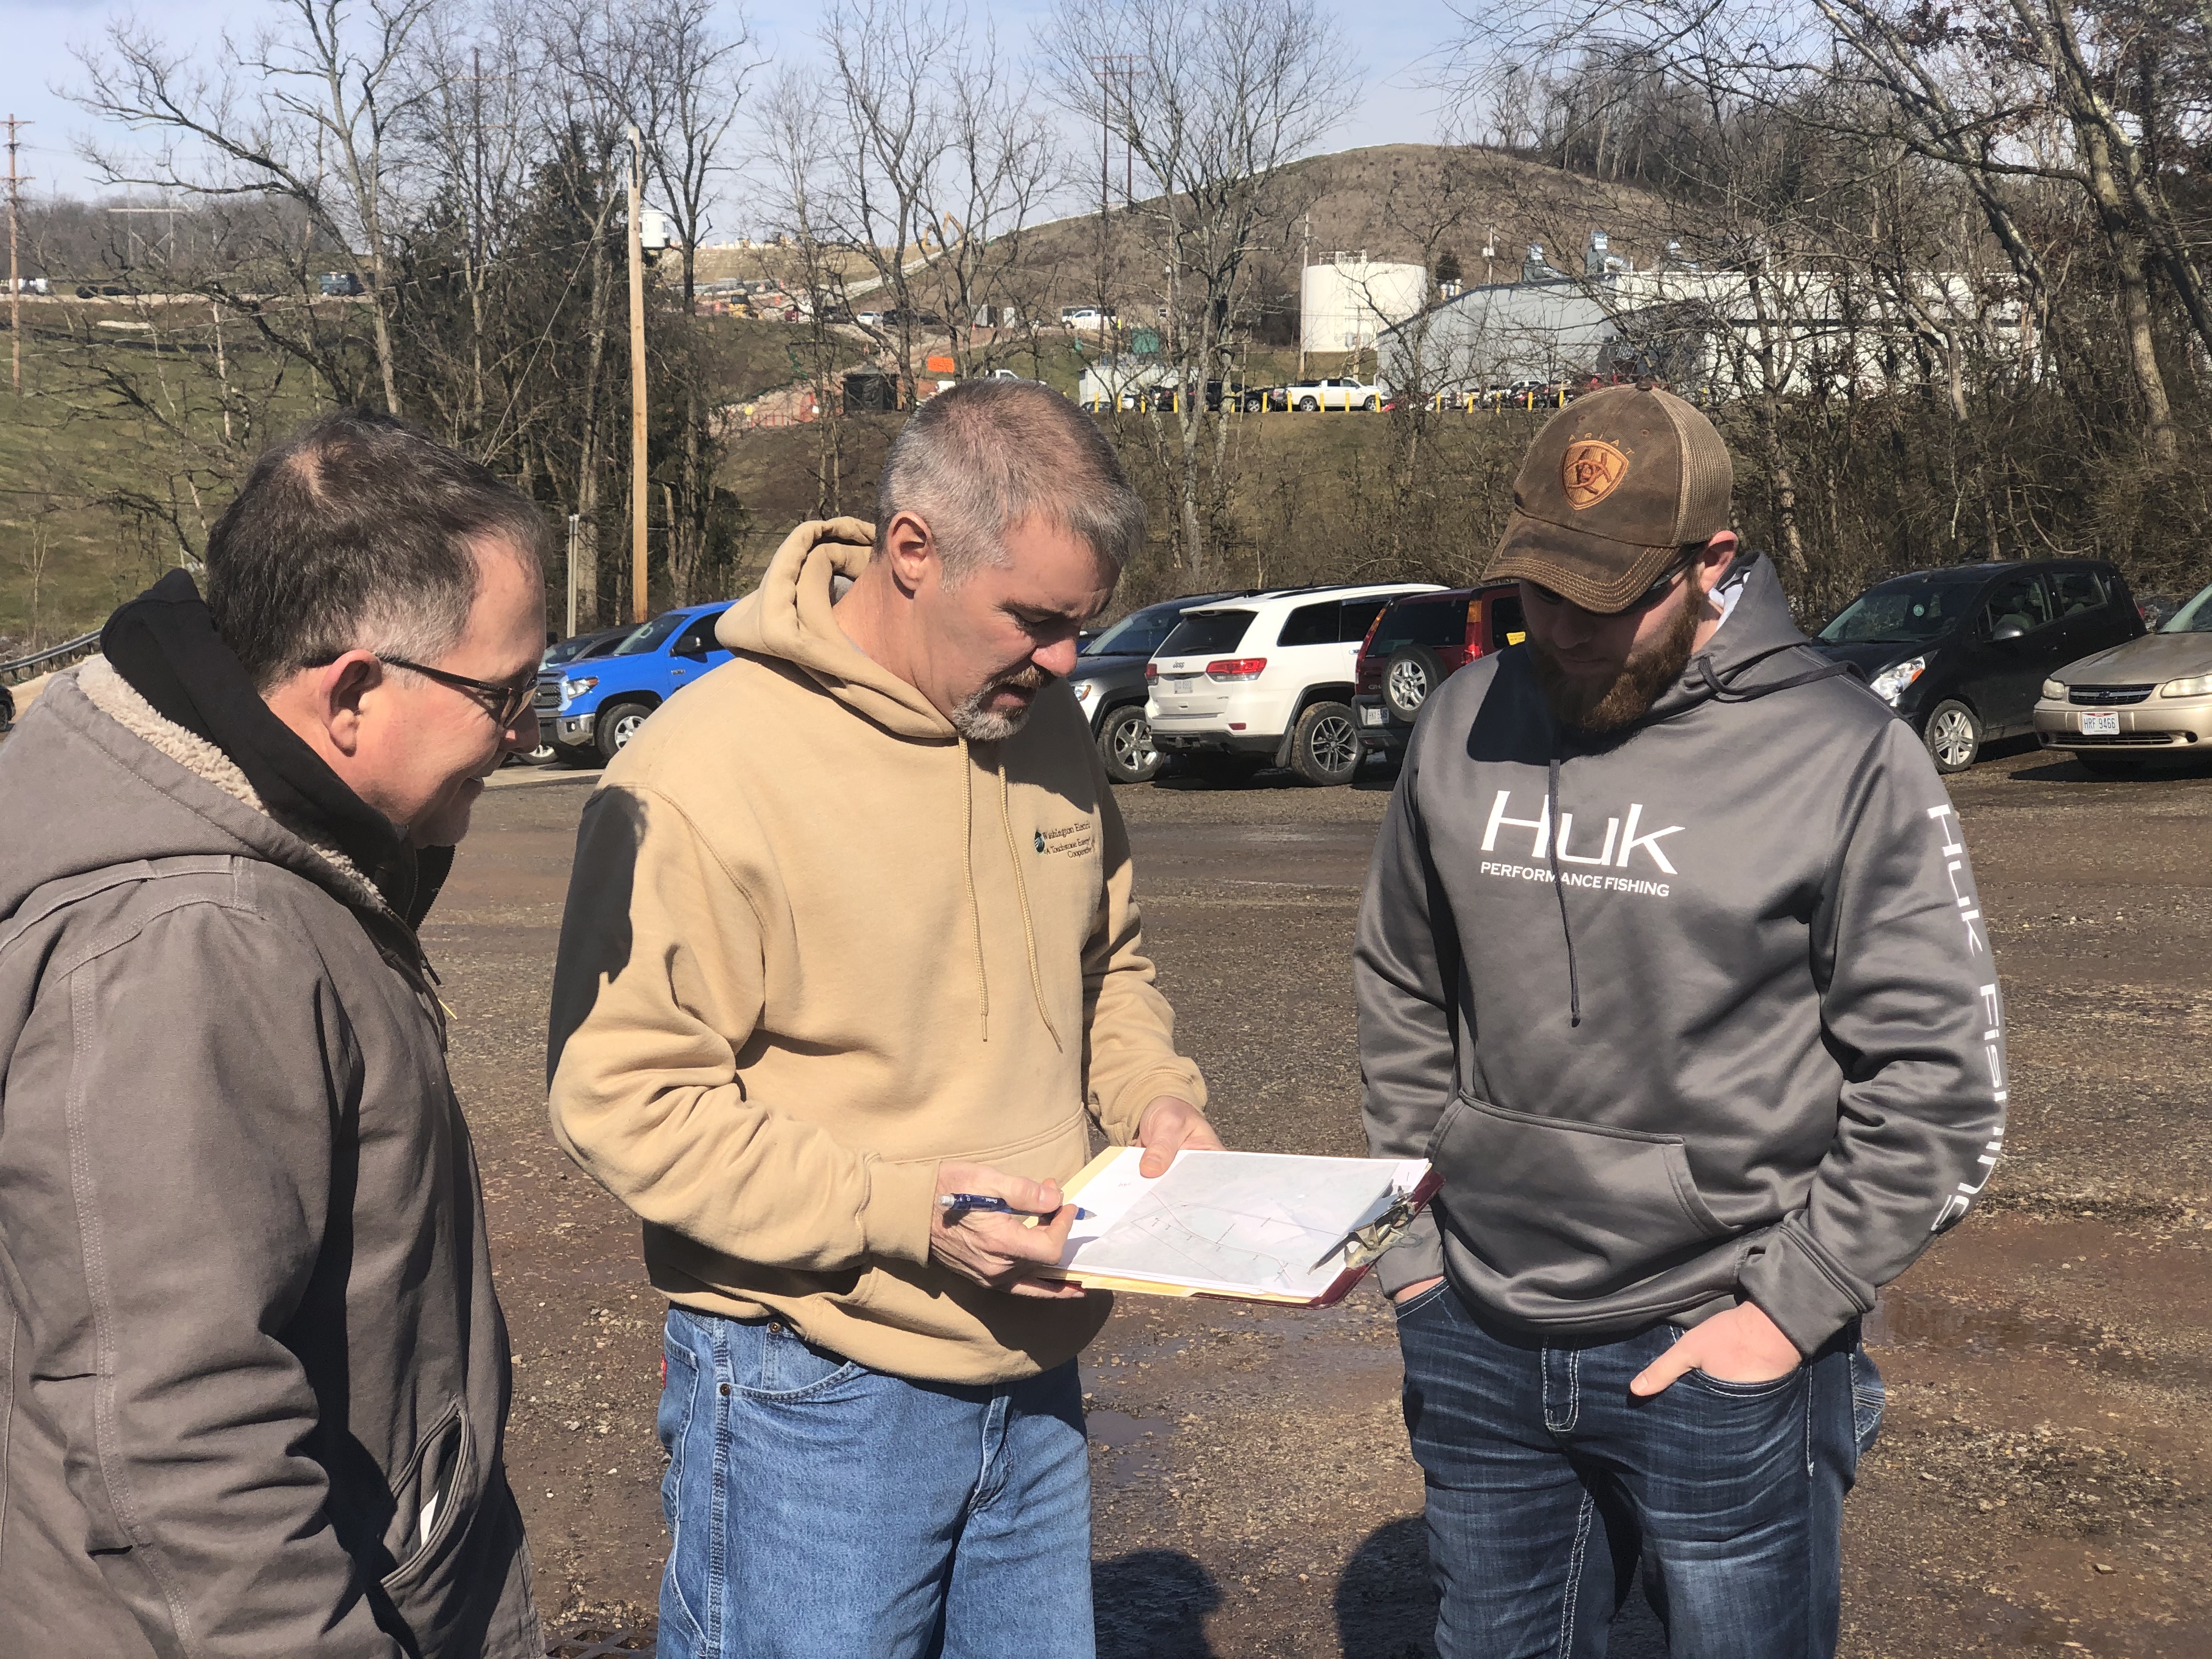 A field engineer meets with two men to discuss establish a new construction